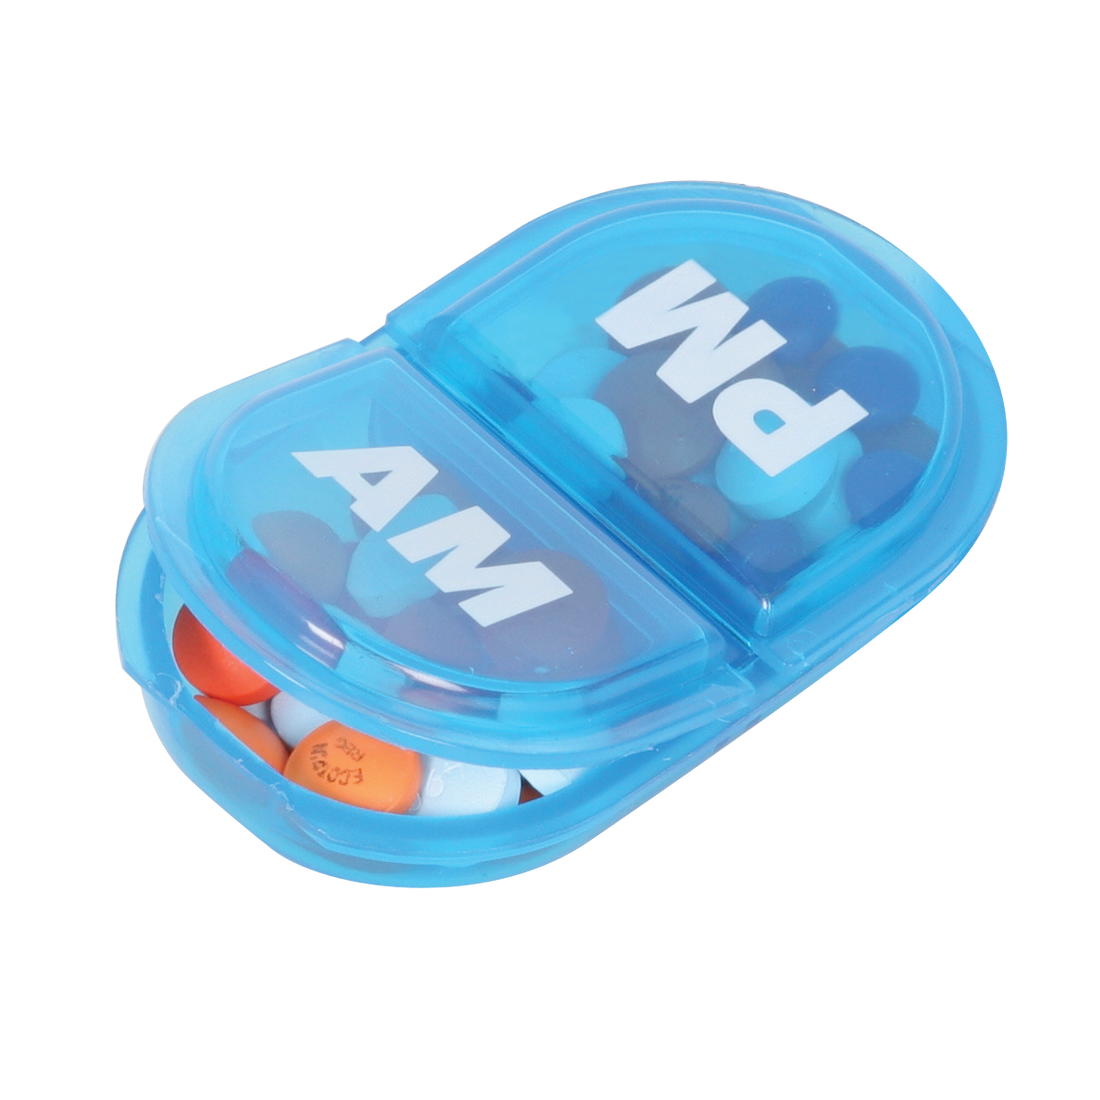 Med Manager Mini Medicine Organizer and Pill Case, Holds (10) Pill Bottles  - (6) Standard Size and (4) Large Bottles, Purple, 12 inches x 6 inches x 3